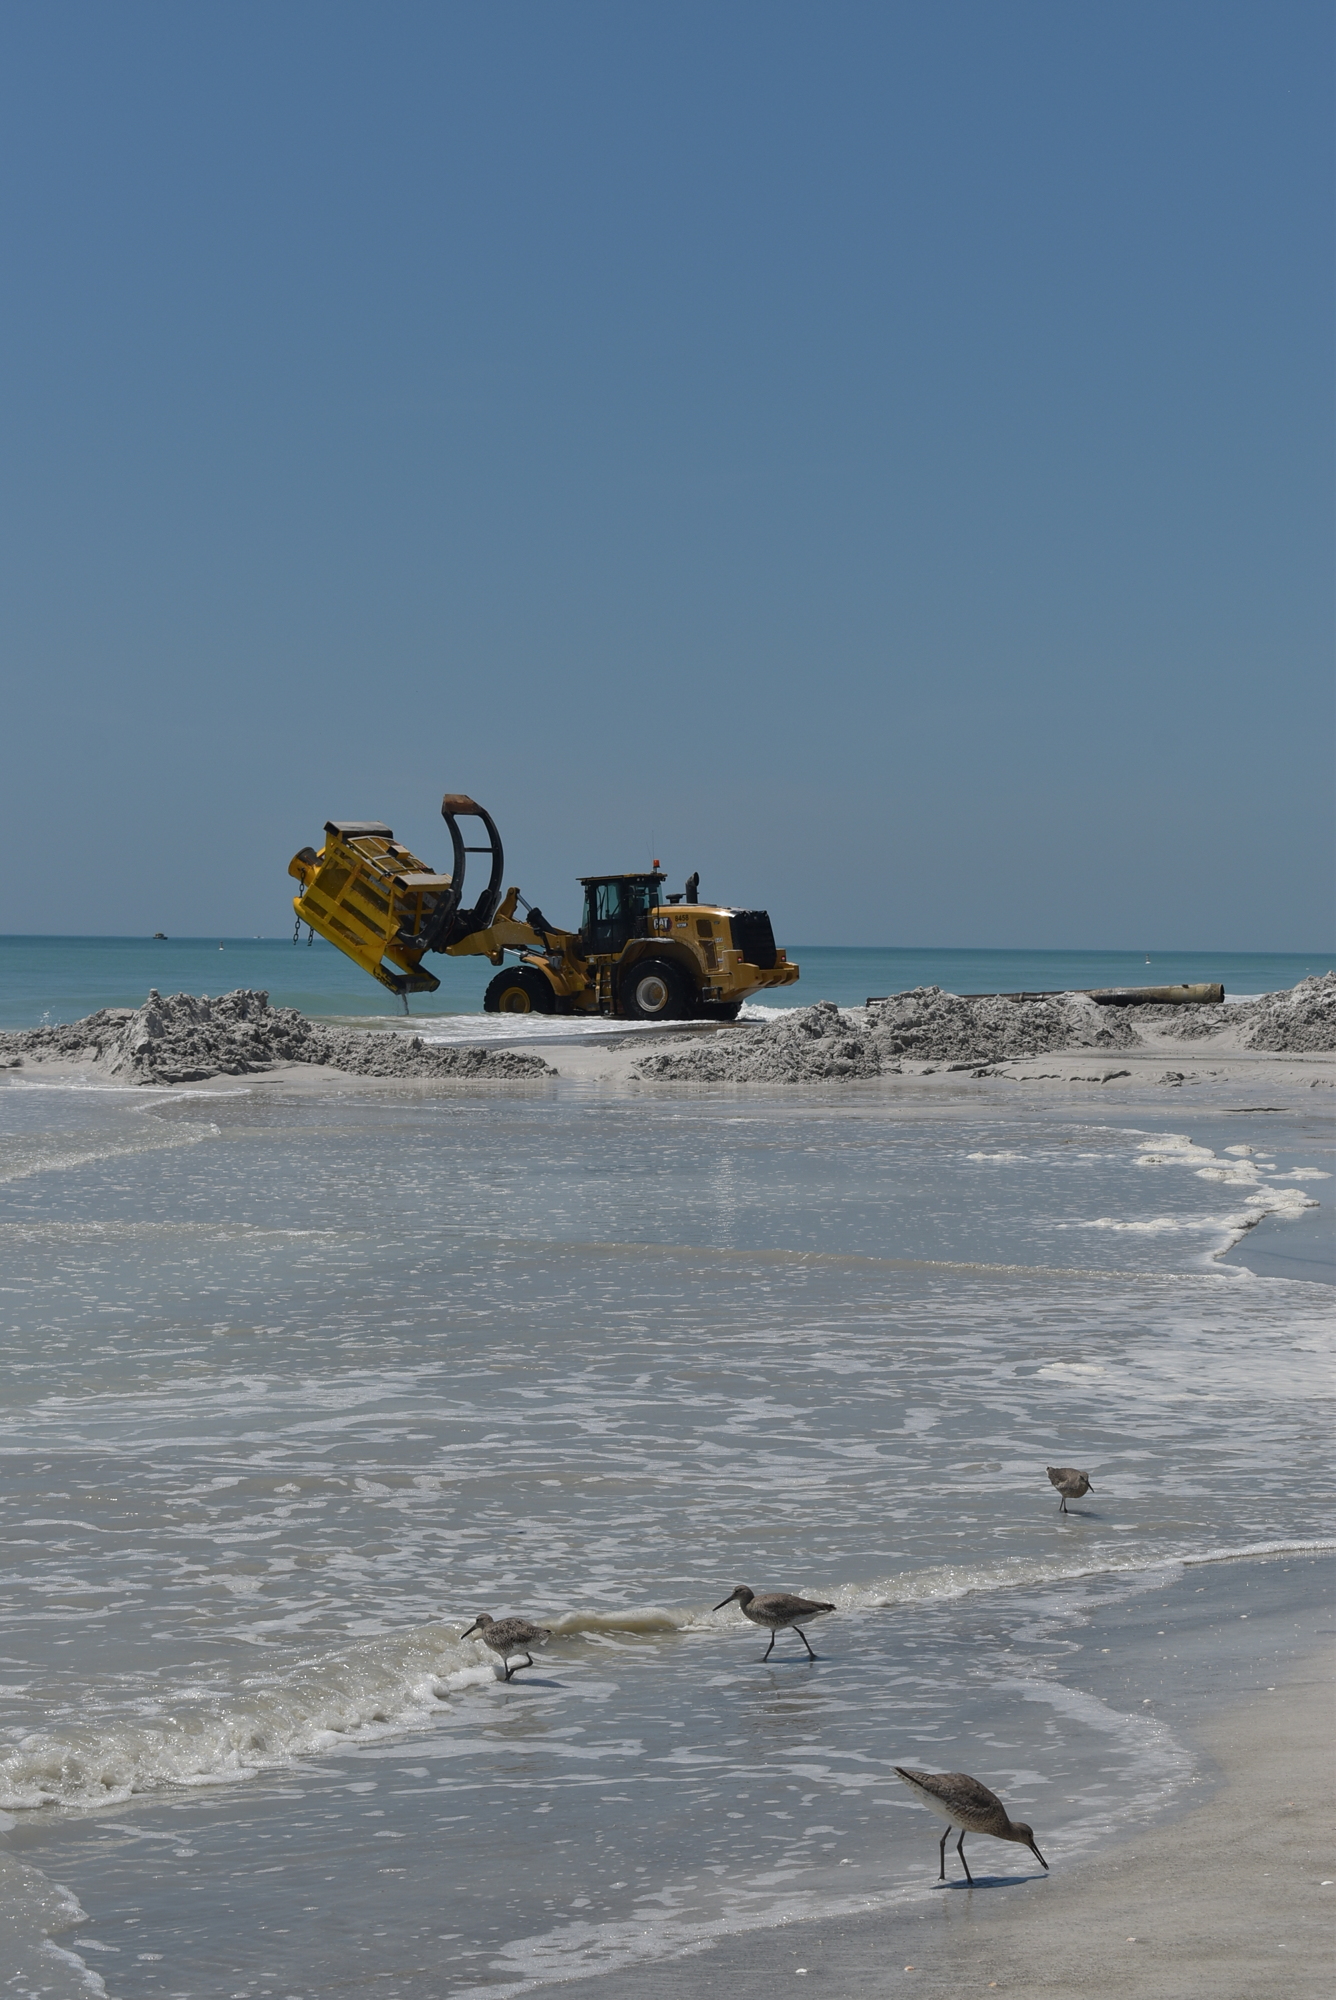 Birds share the beach with construction vehicles.